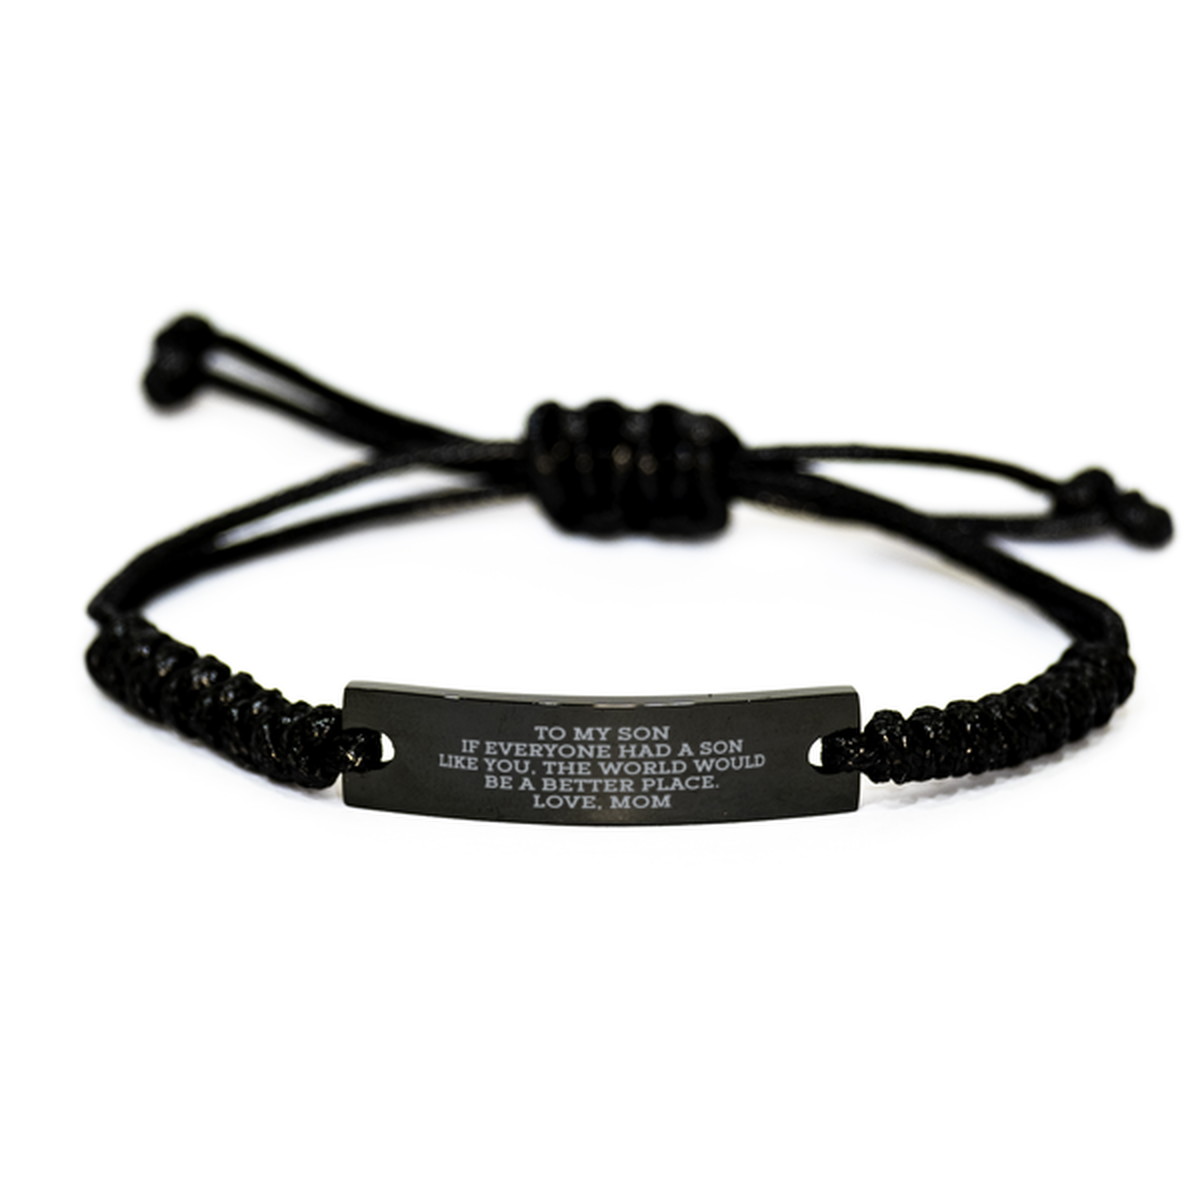 To My Son Rope Bracelet, If Everyone Had A Son Like You, Graduation Day Gifts For Son From Mom, Birthday Gifts For Men